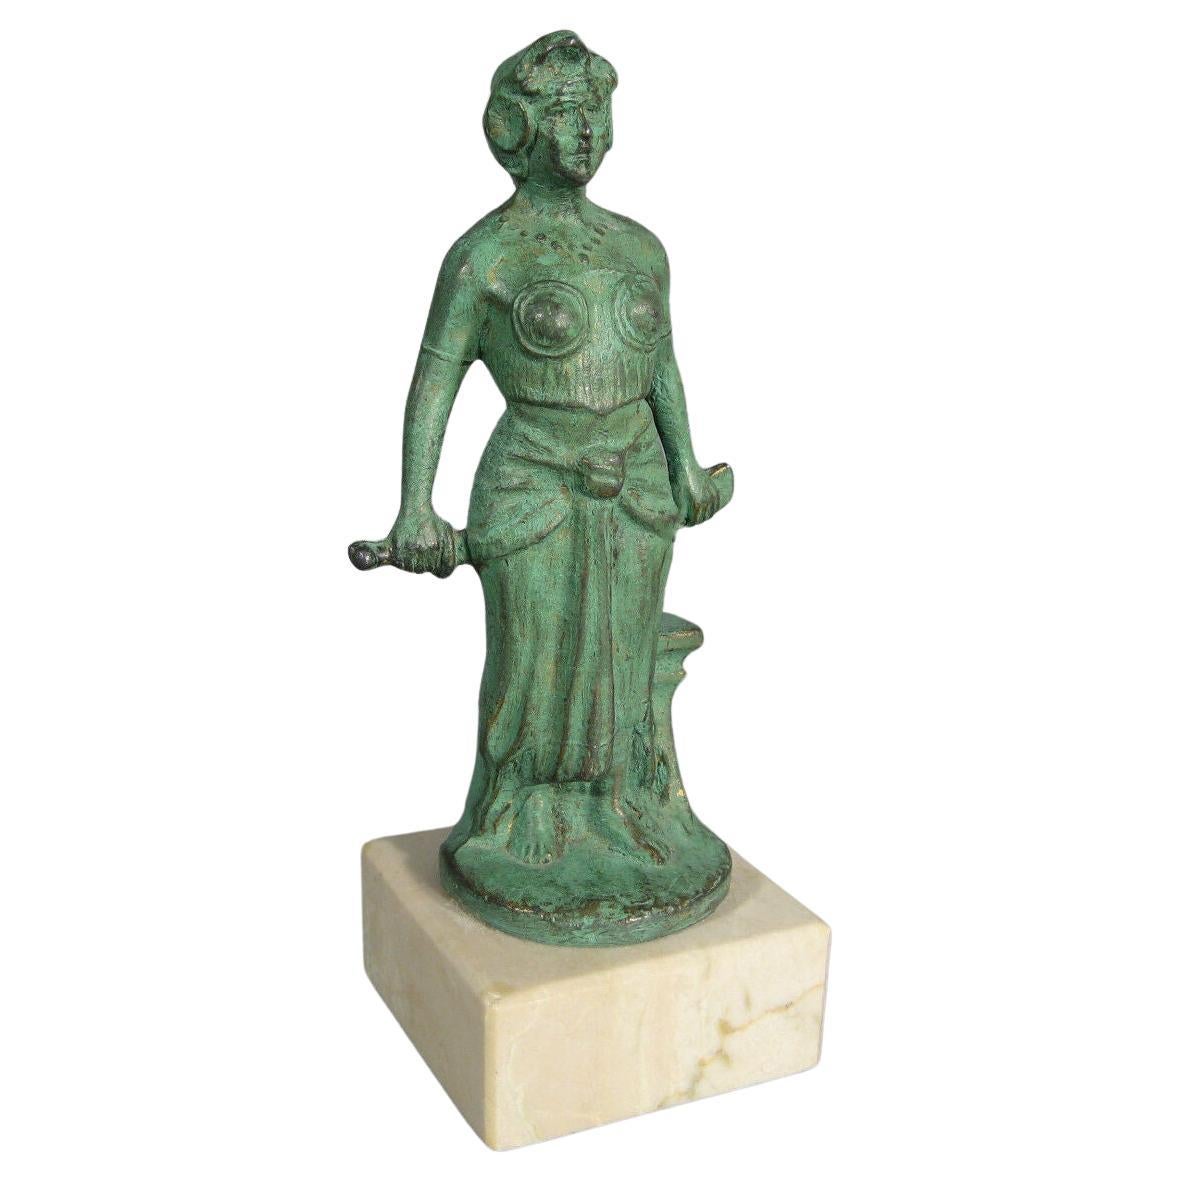 Art Deco Statuette of a Woman with Scimitar by A. Rucho (1930s) -1Y06